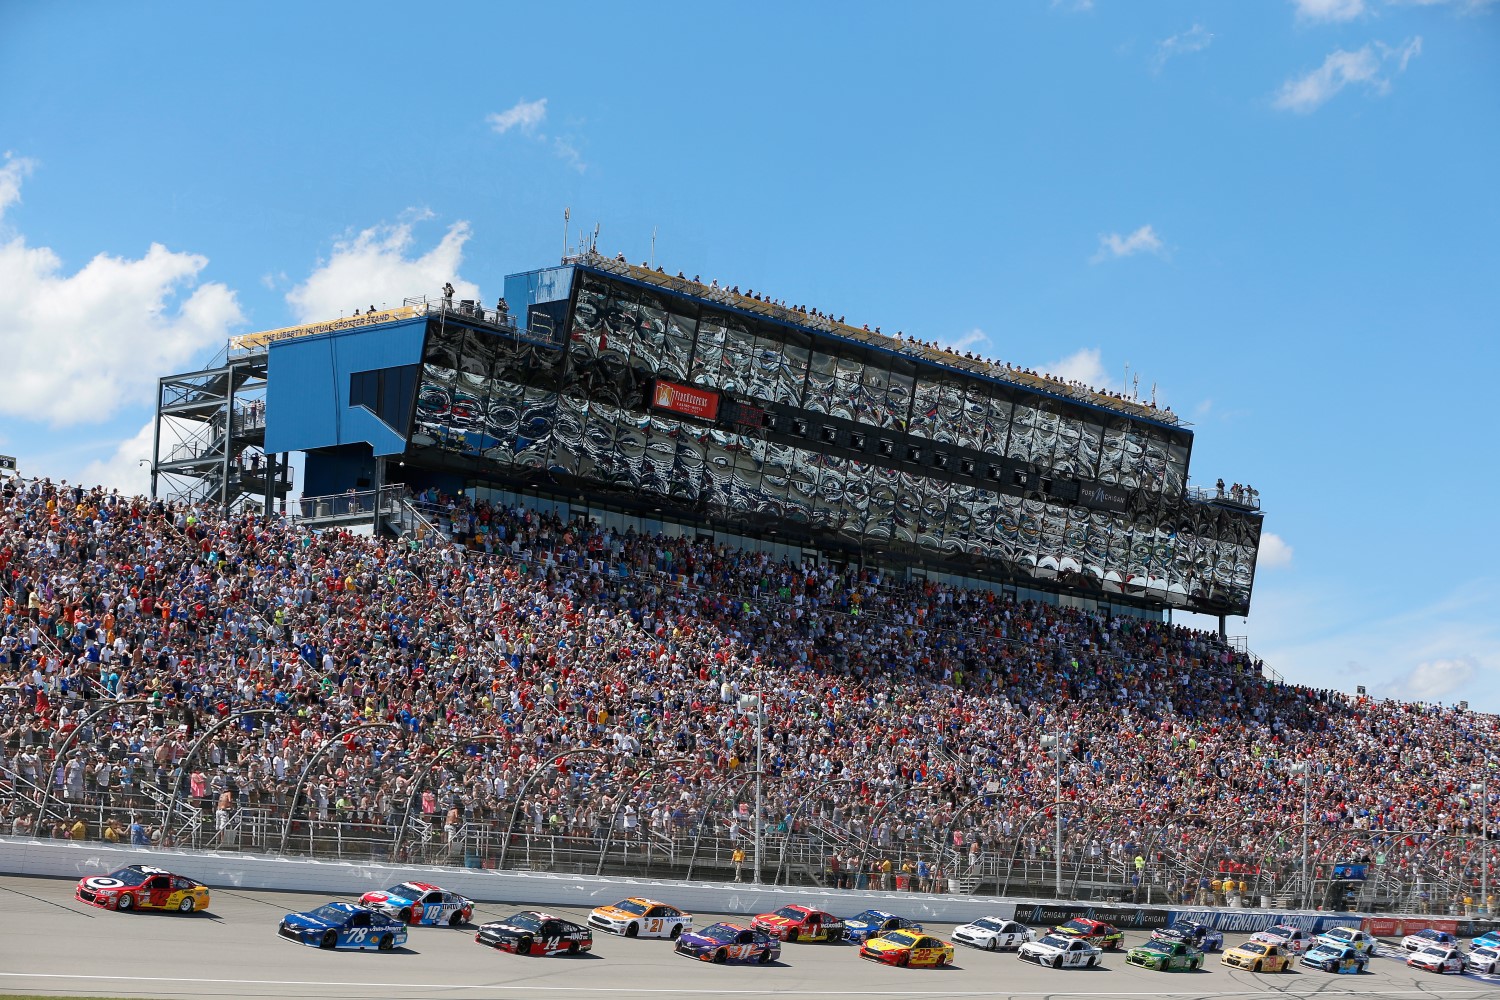 With the August race on NBCSN, did its low TV ratings make race sponsorship a waste of money?